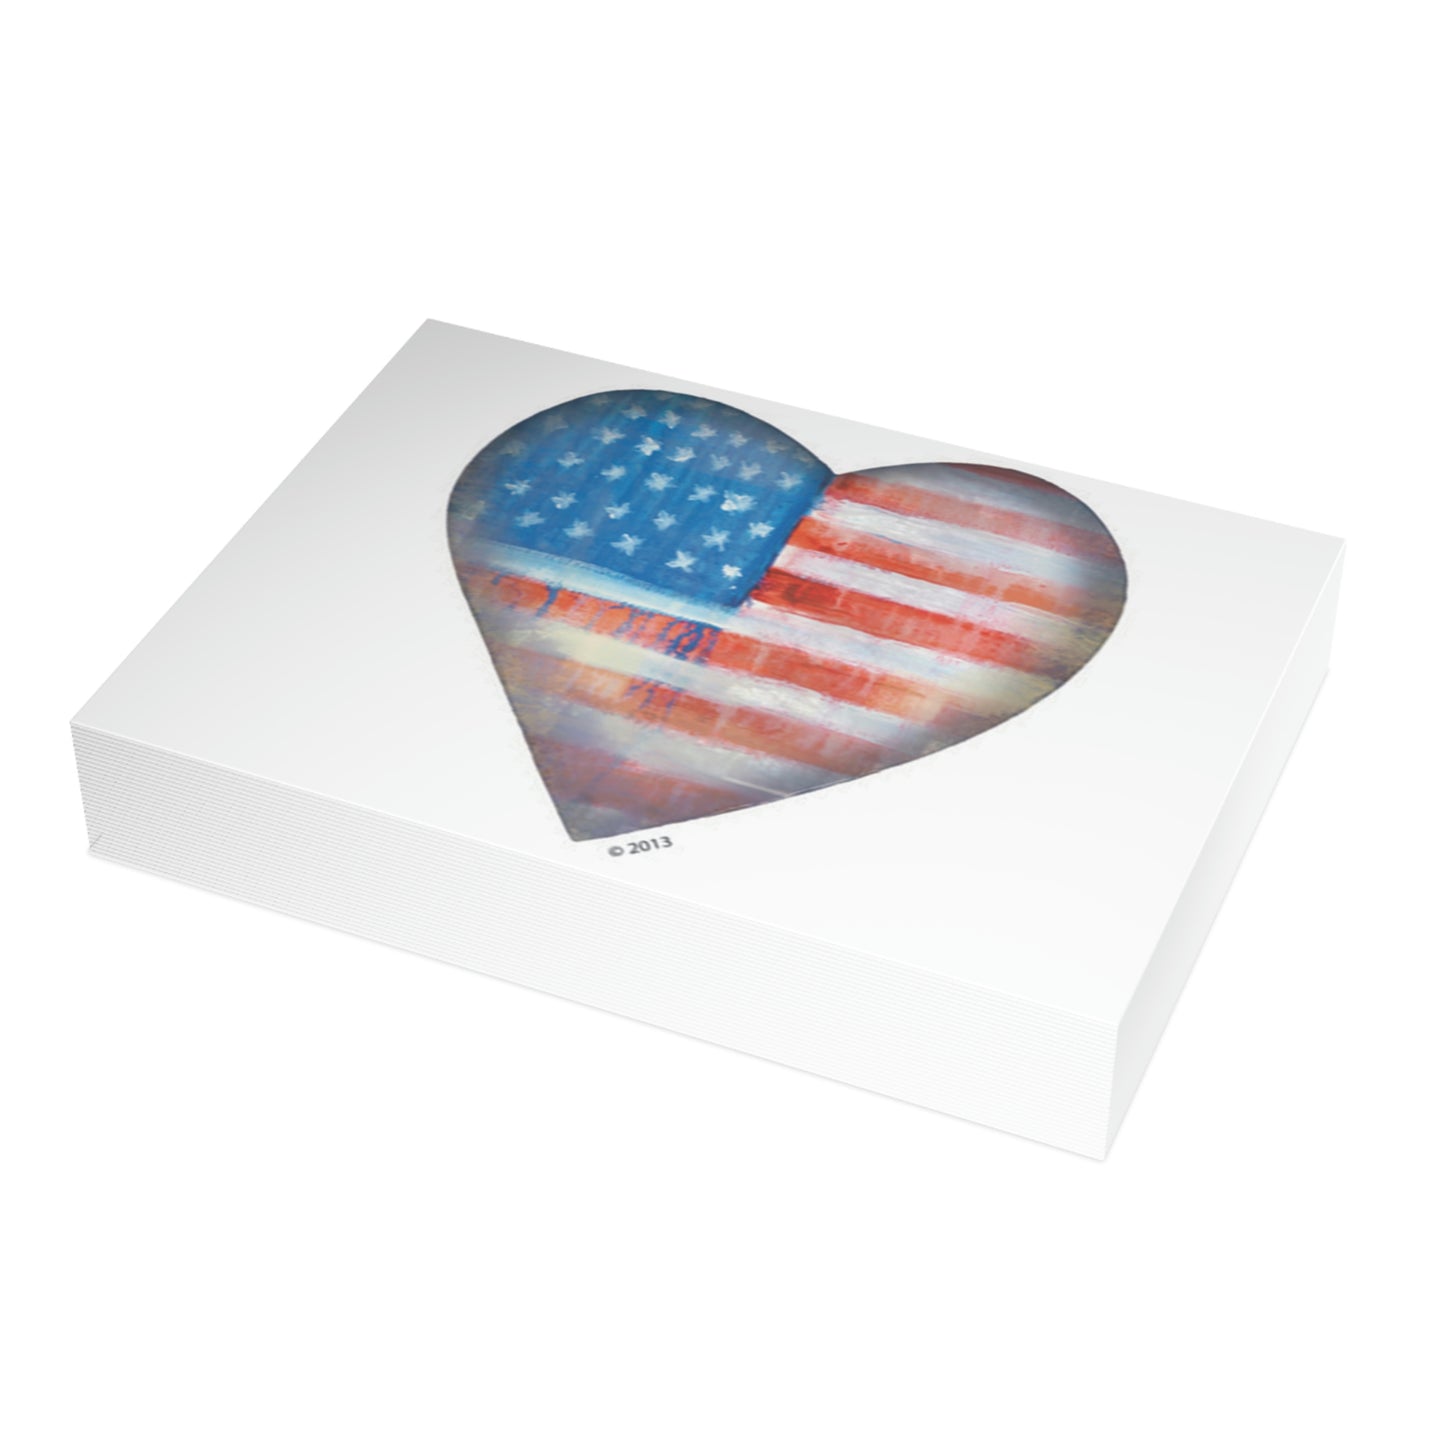 Greeting Cards - American Heart 1, 10, 20, & 50 pieces